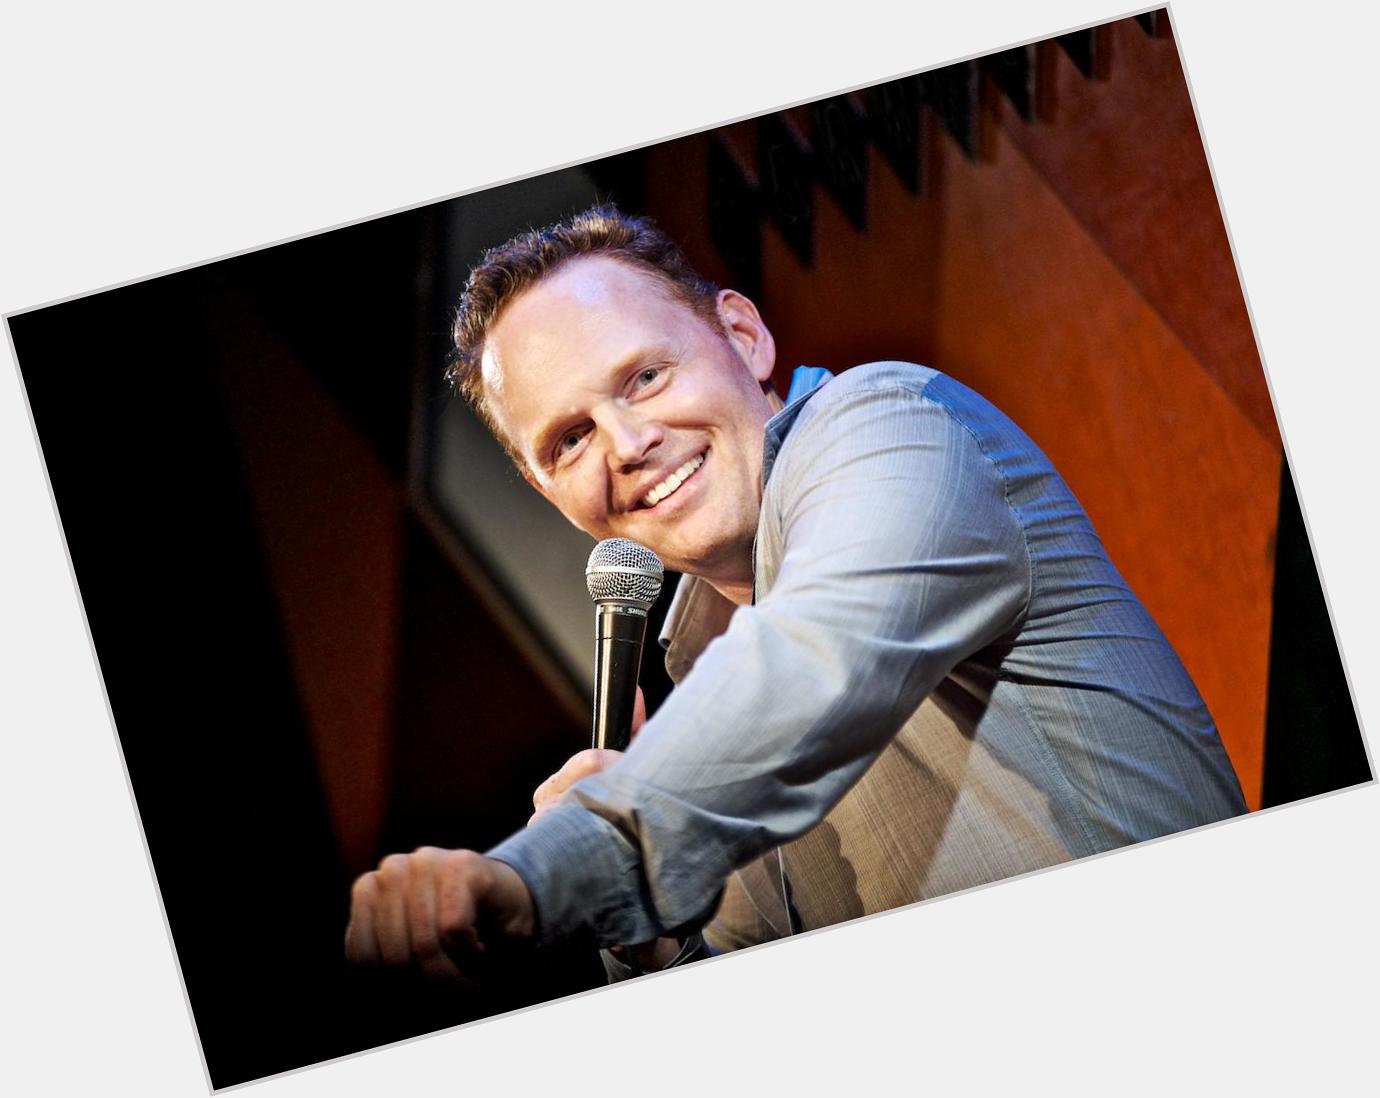 Happy Birthday to Bill Burr, who turns 47 today! 